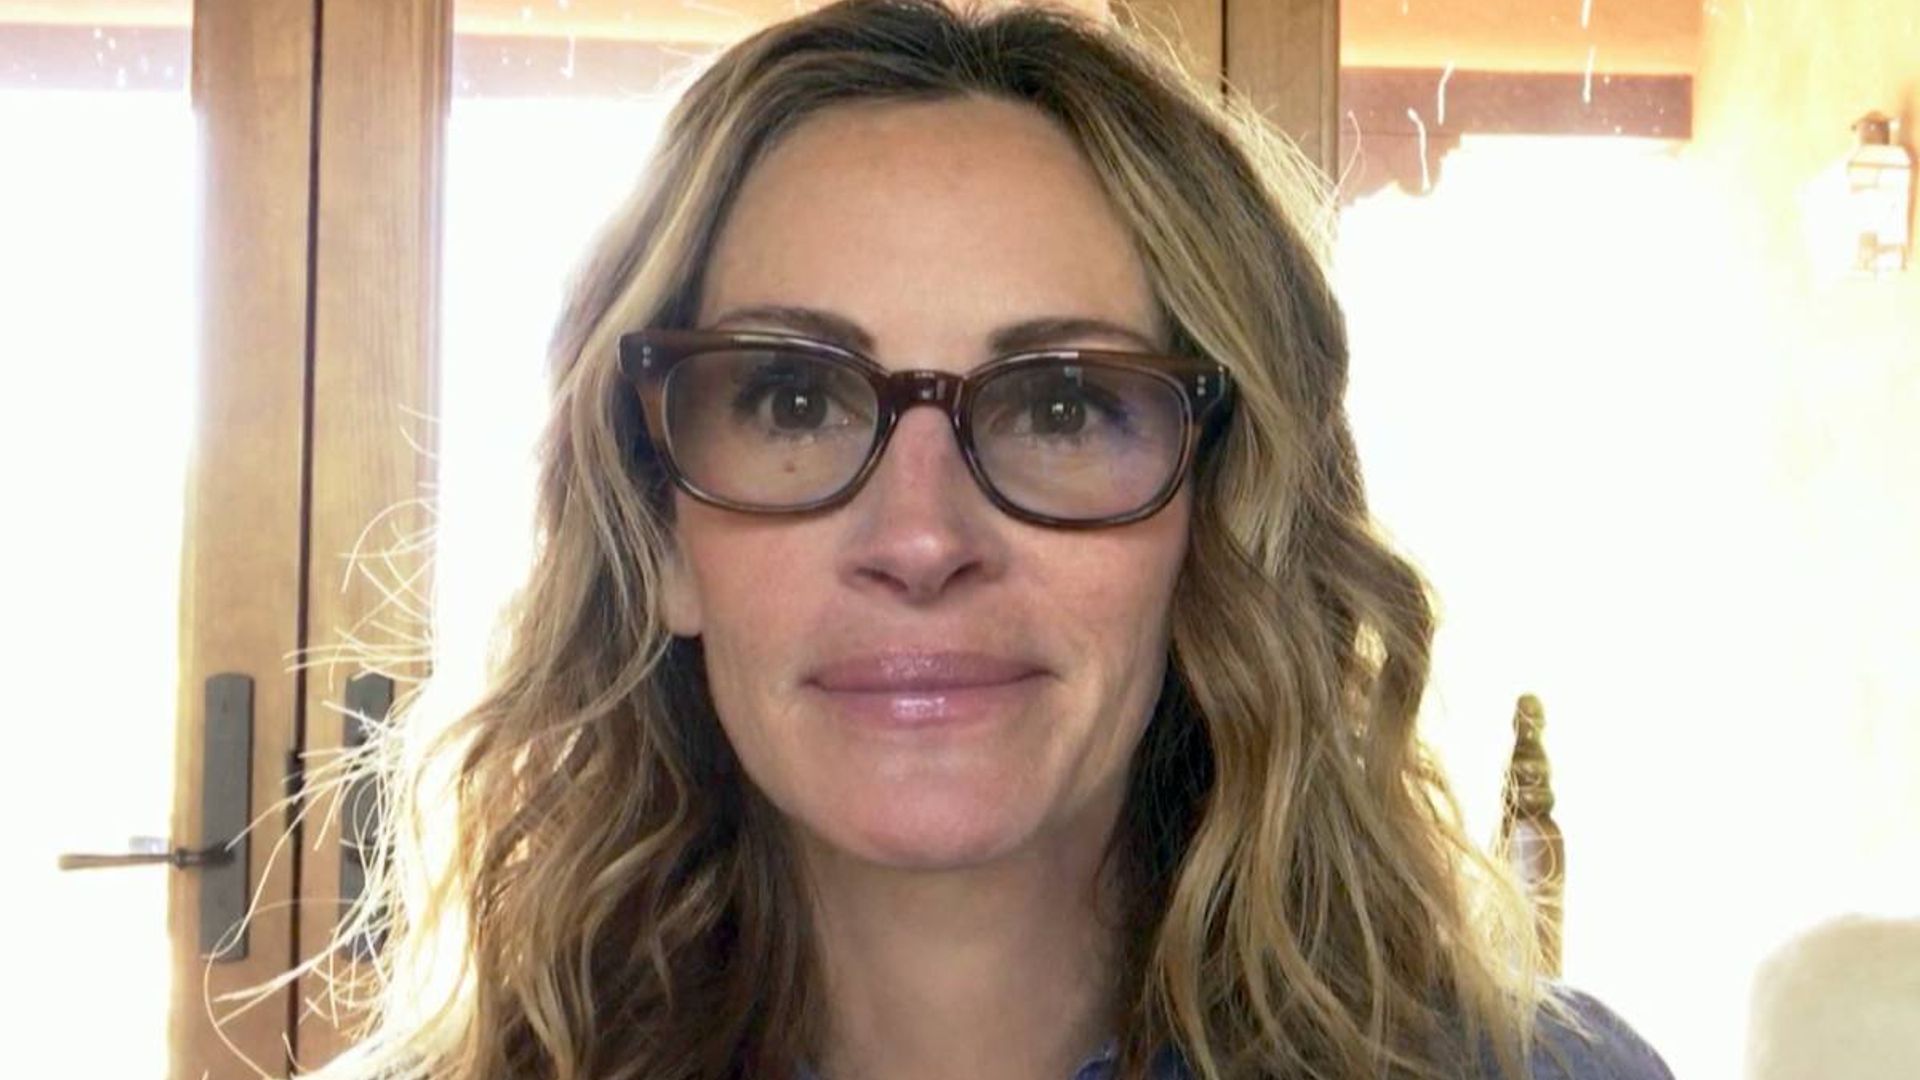 Julia Roberts' Latest Look Pays Homage to Her 'Pretty Woman' Character